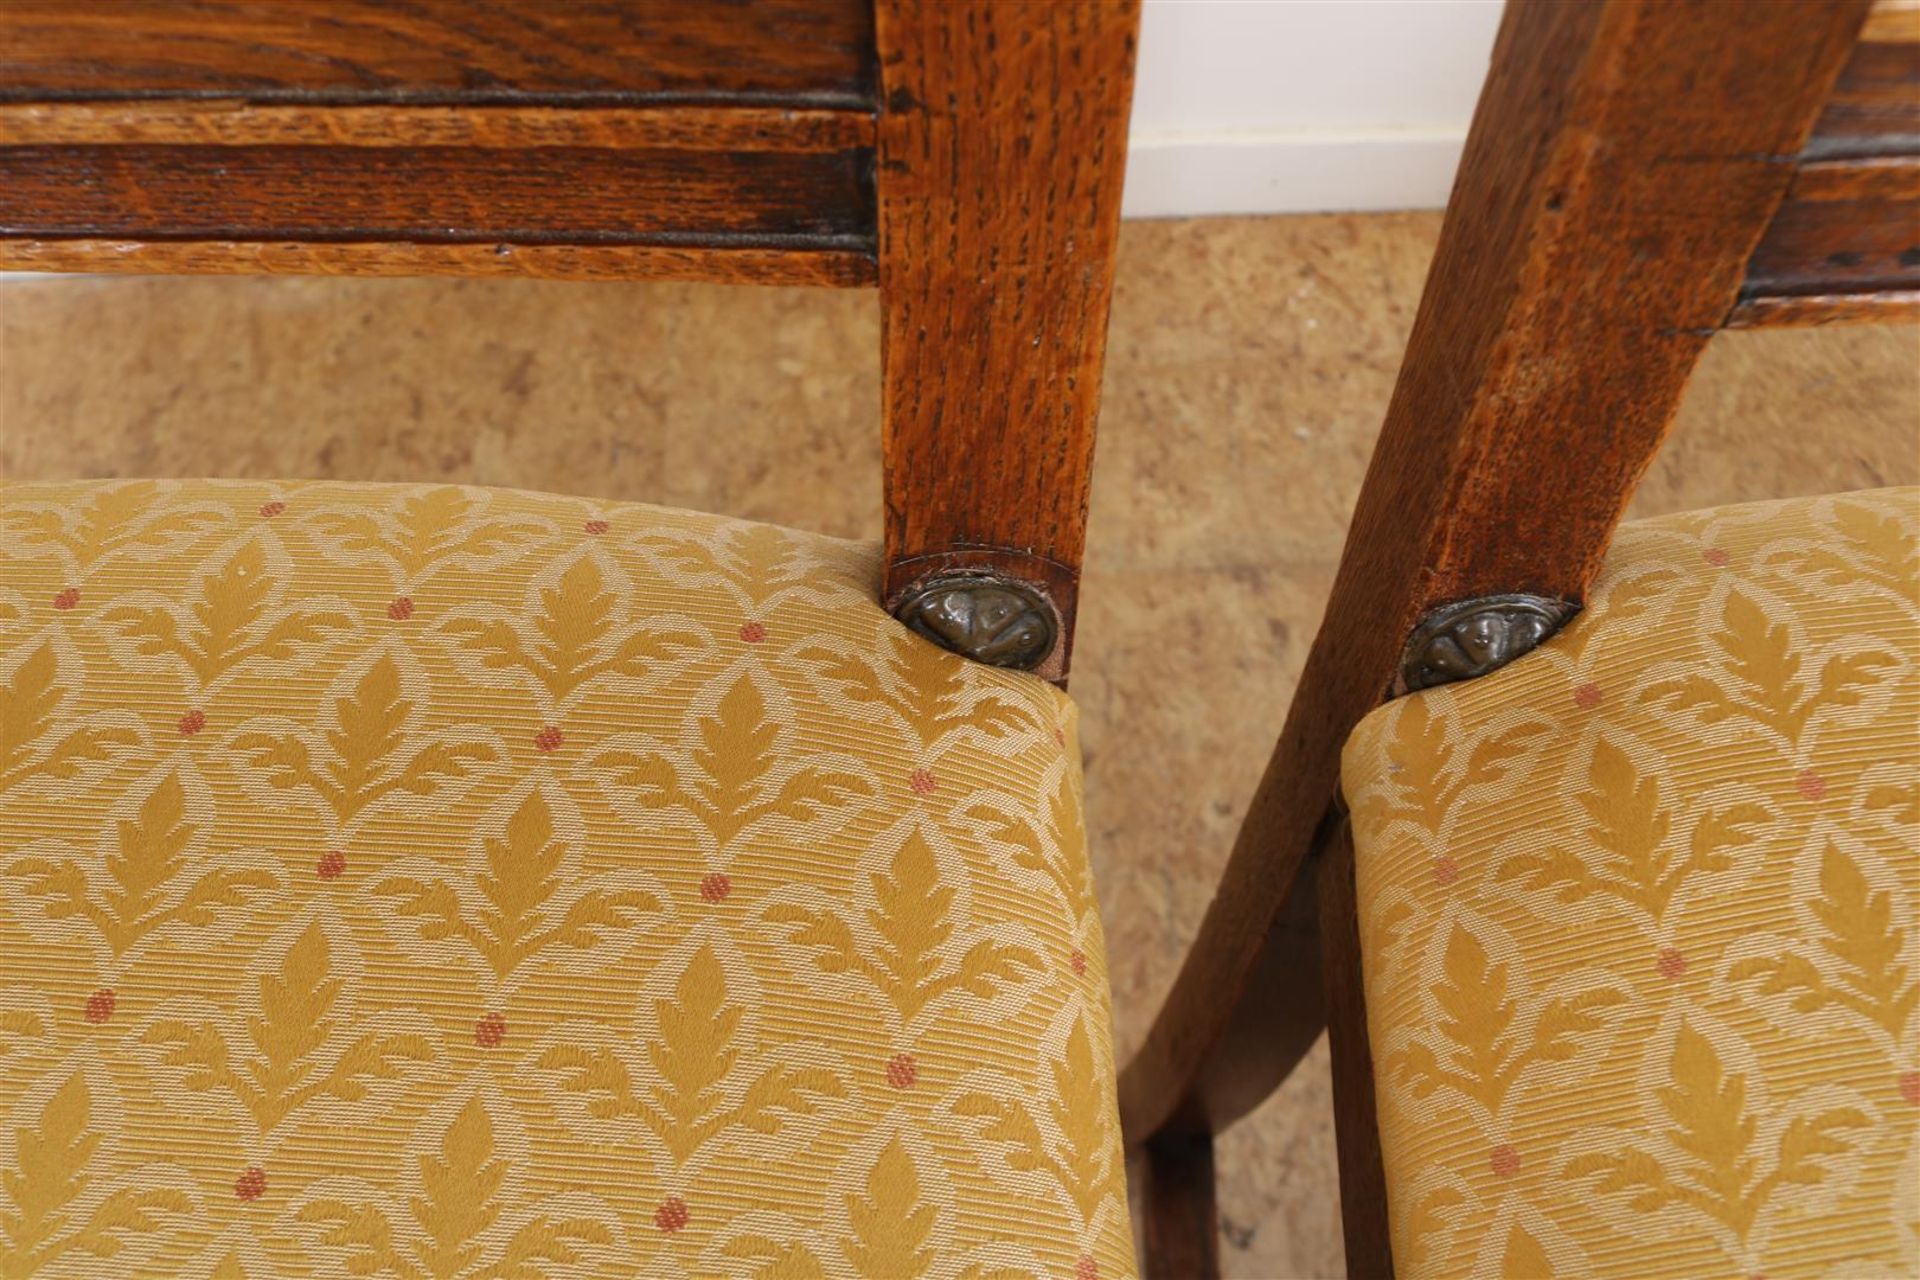 Series of 6 oak Renaissance-style chairs on vase legs connected by rules, early 20th century. - Image 5 of 6